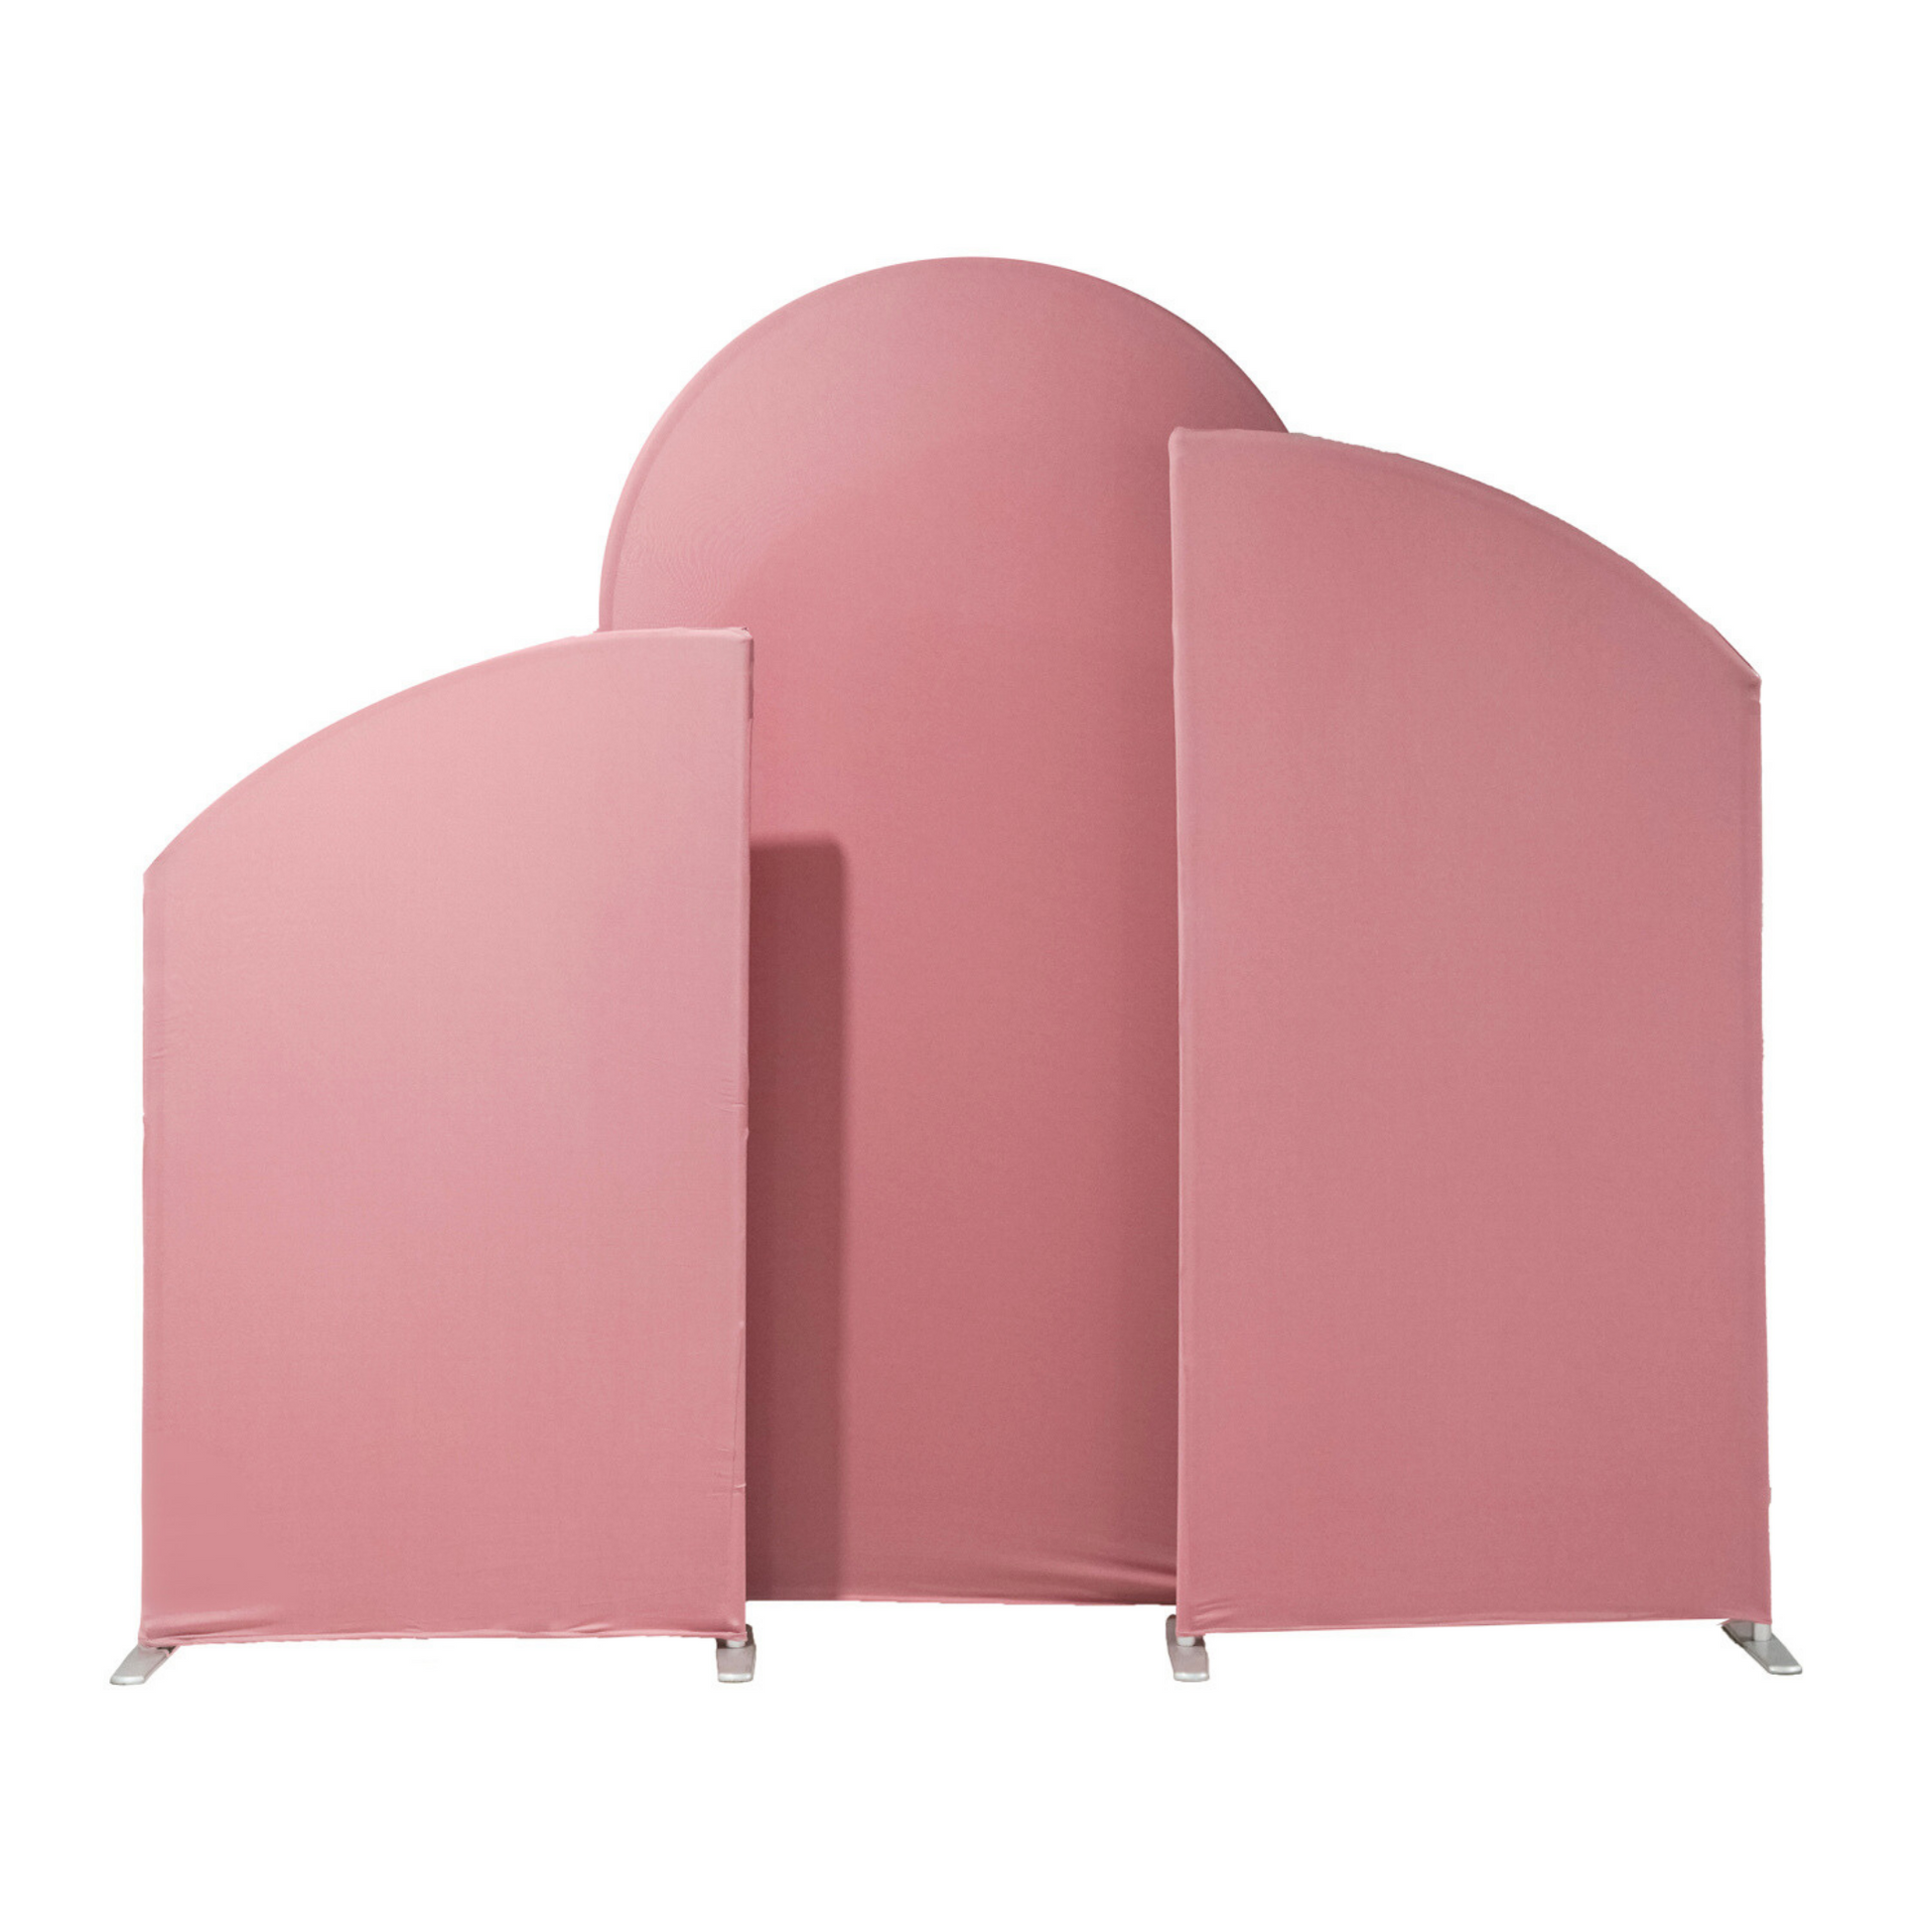 Spandex Arch Covers for Heavy Duty Chiara Frame Backdrop 3pc/set - Dusty Rose/Mauve